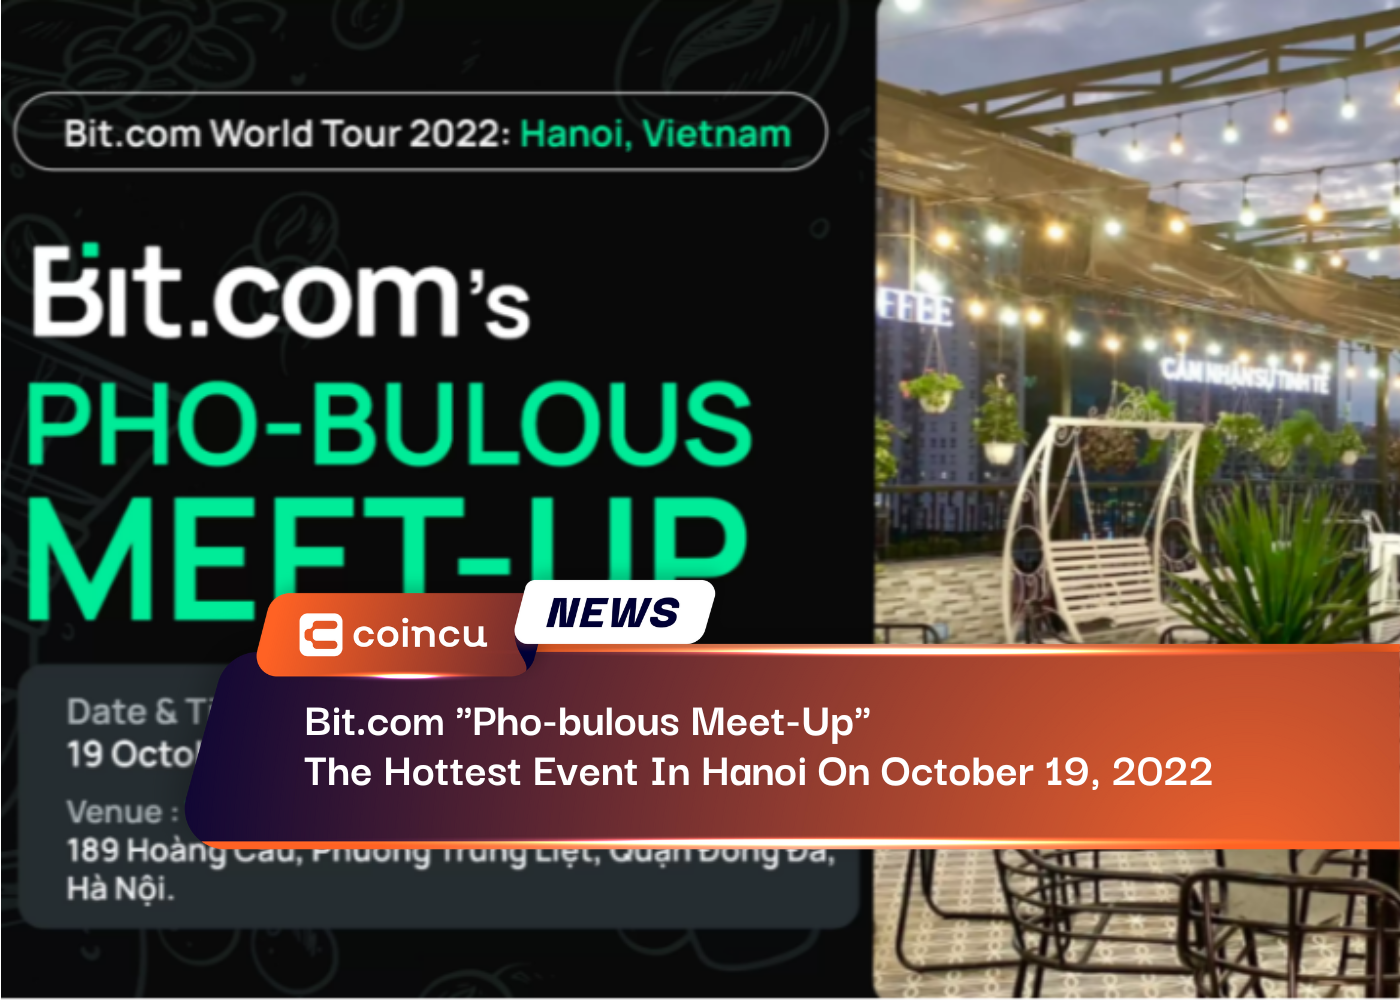 Bit.com "Pho-bulous Meet-Up", The Hottest Event In Hanoi On October 19, 2022